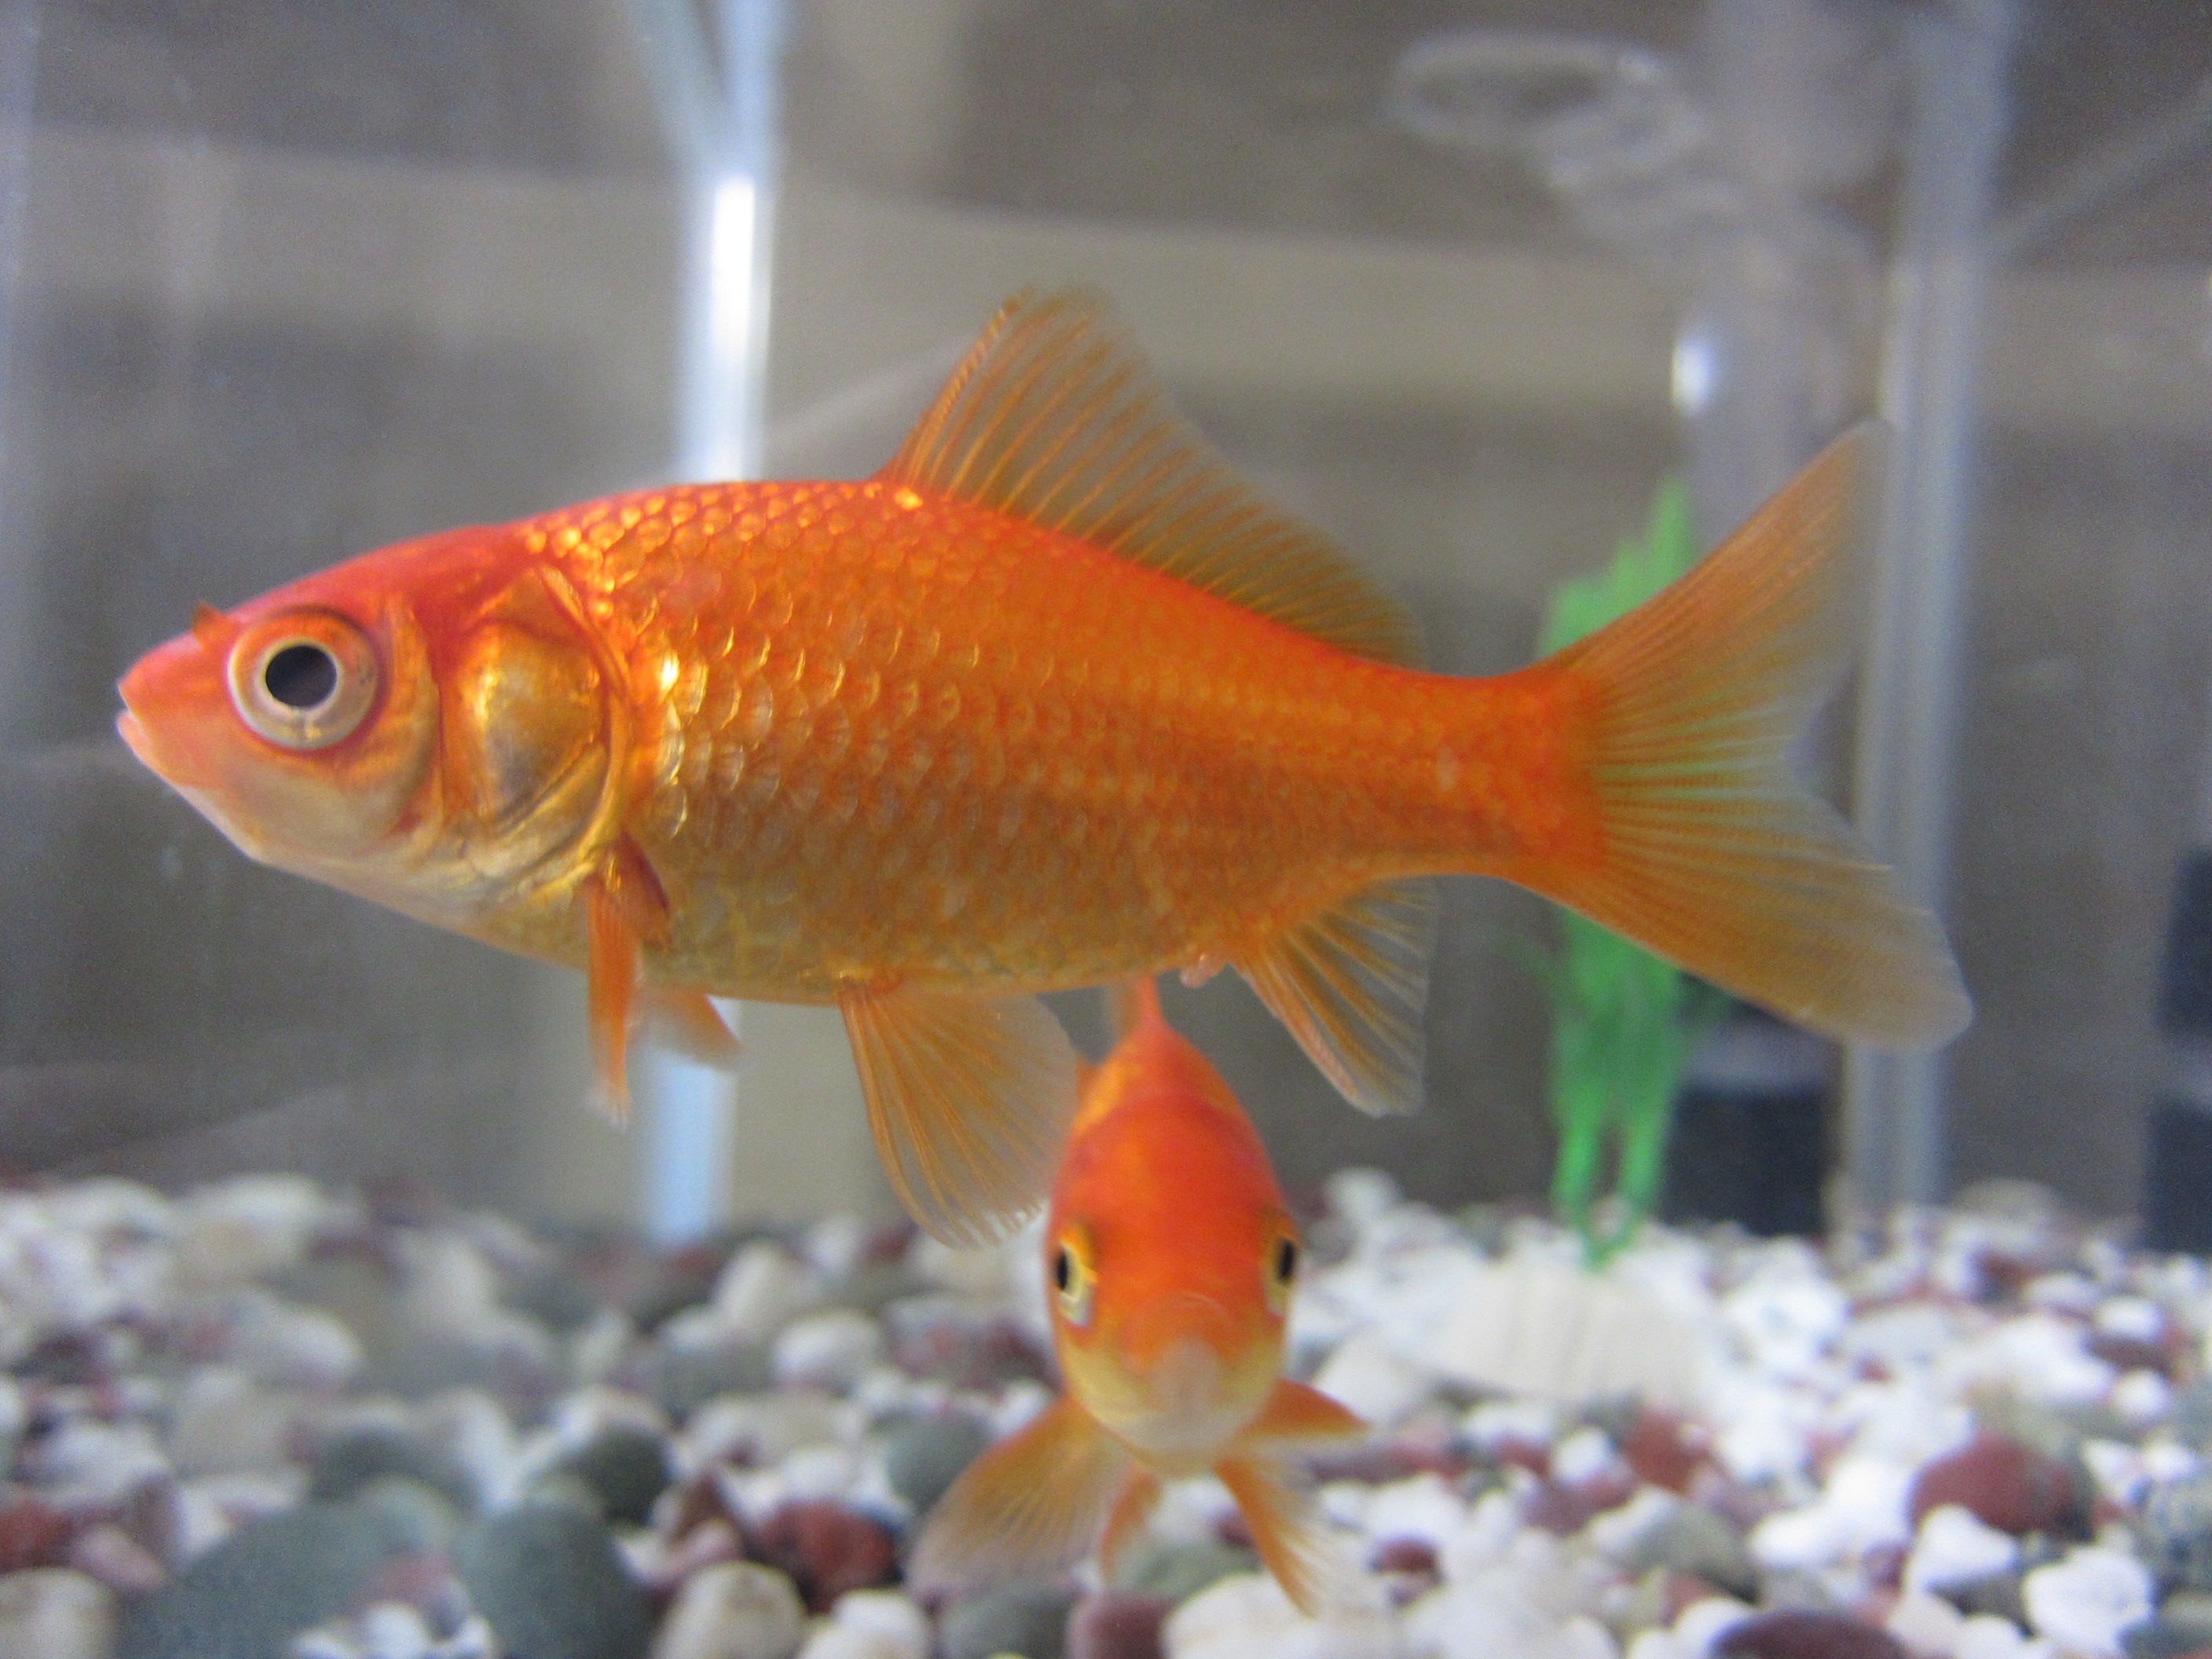 Common Goldfish - Carassius auratus, click for a larger image, photo licensed for reuse CCASA3.0